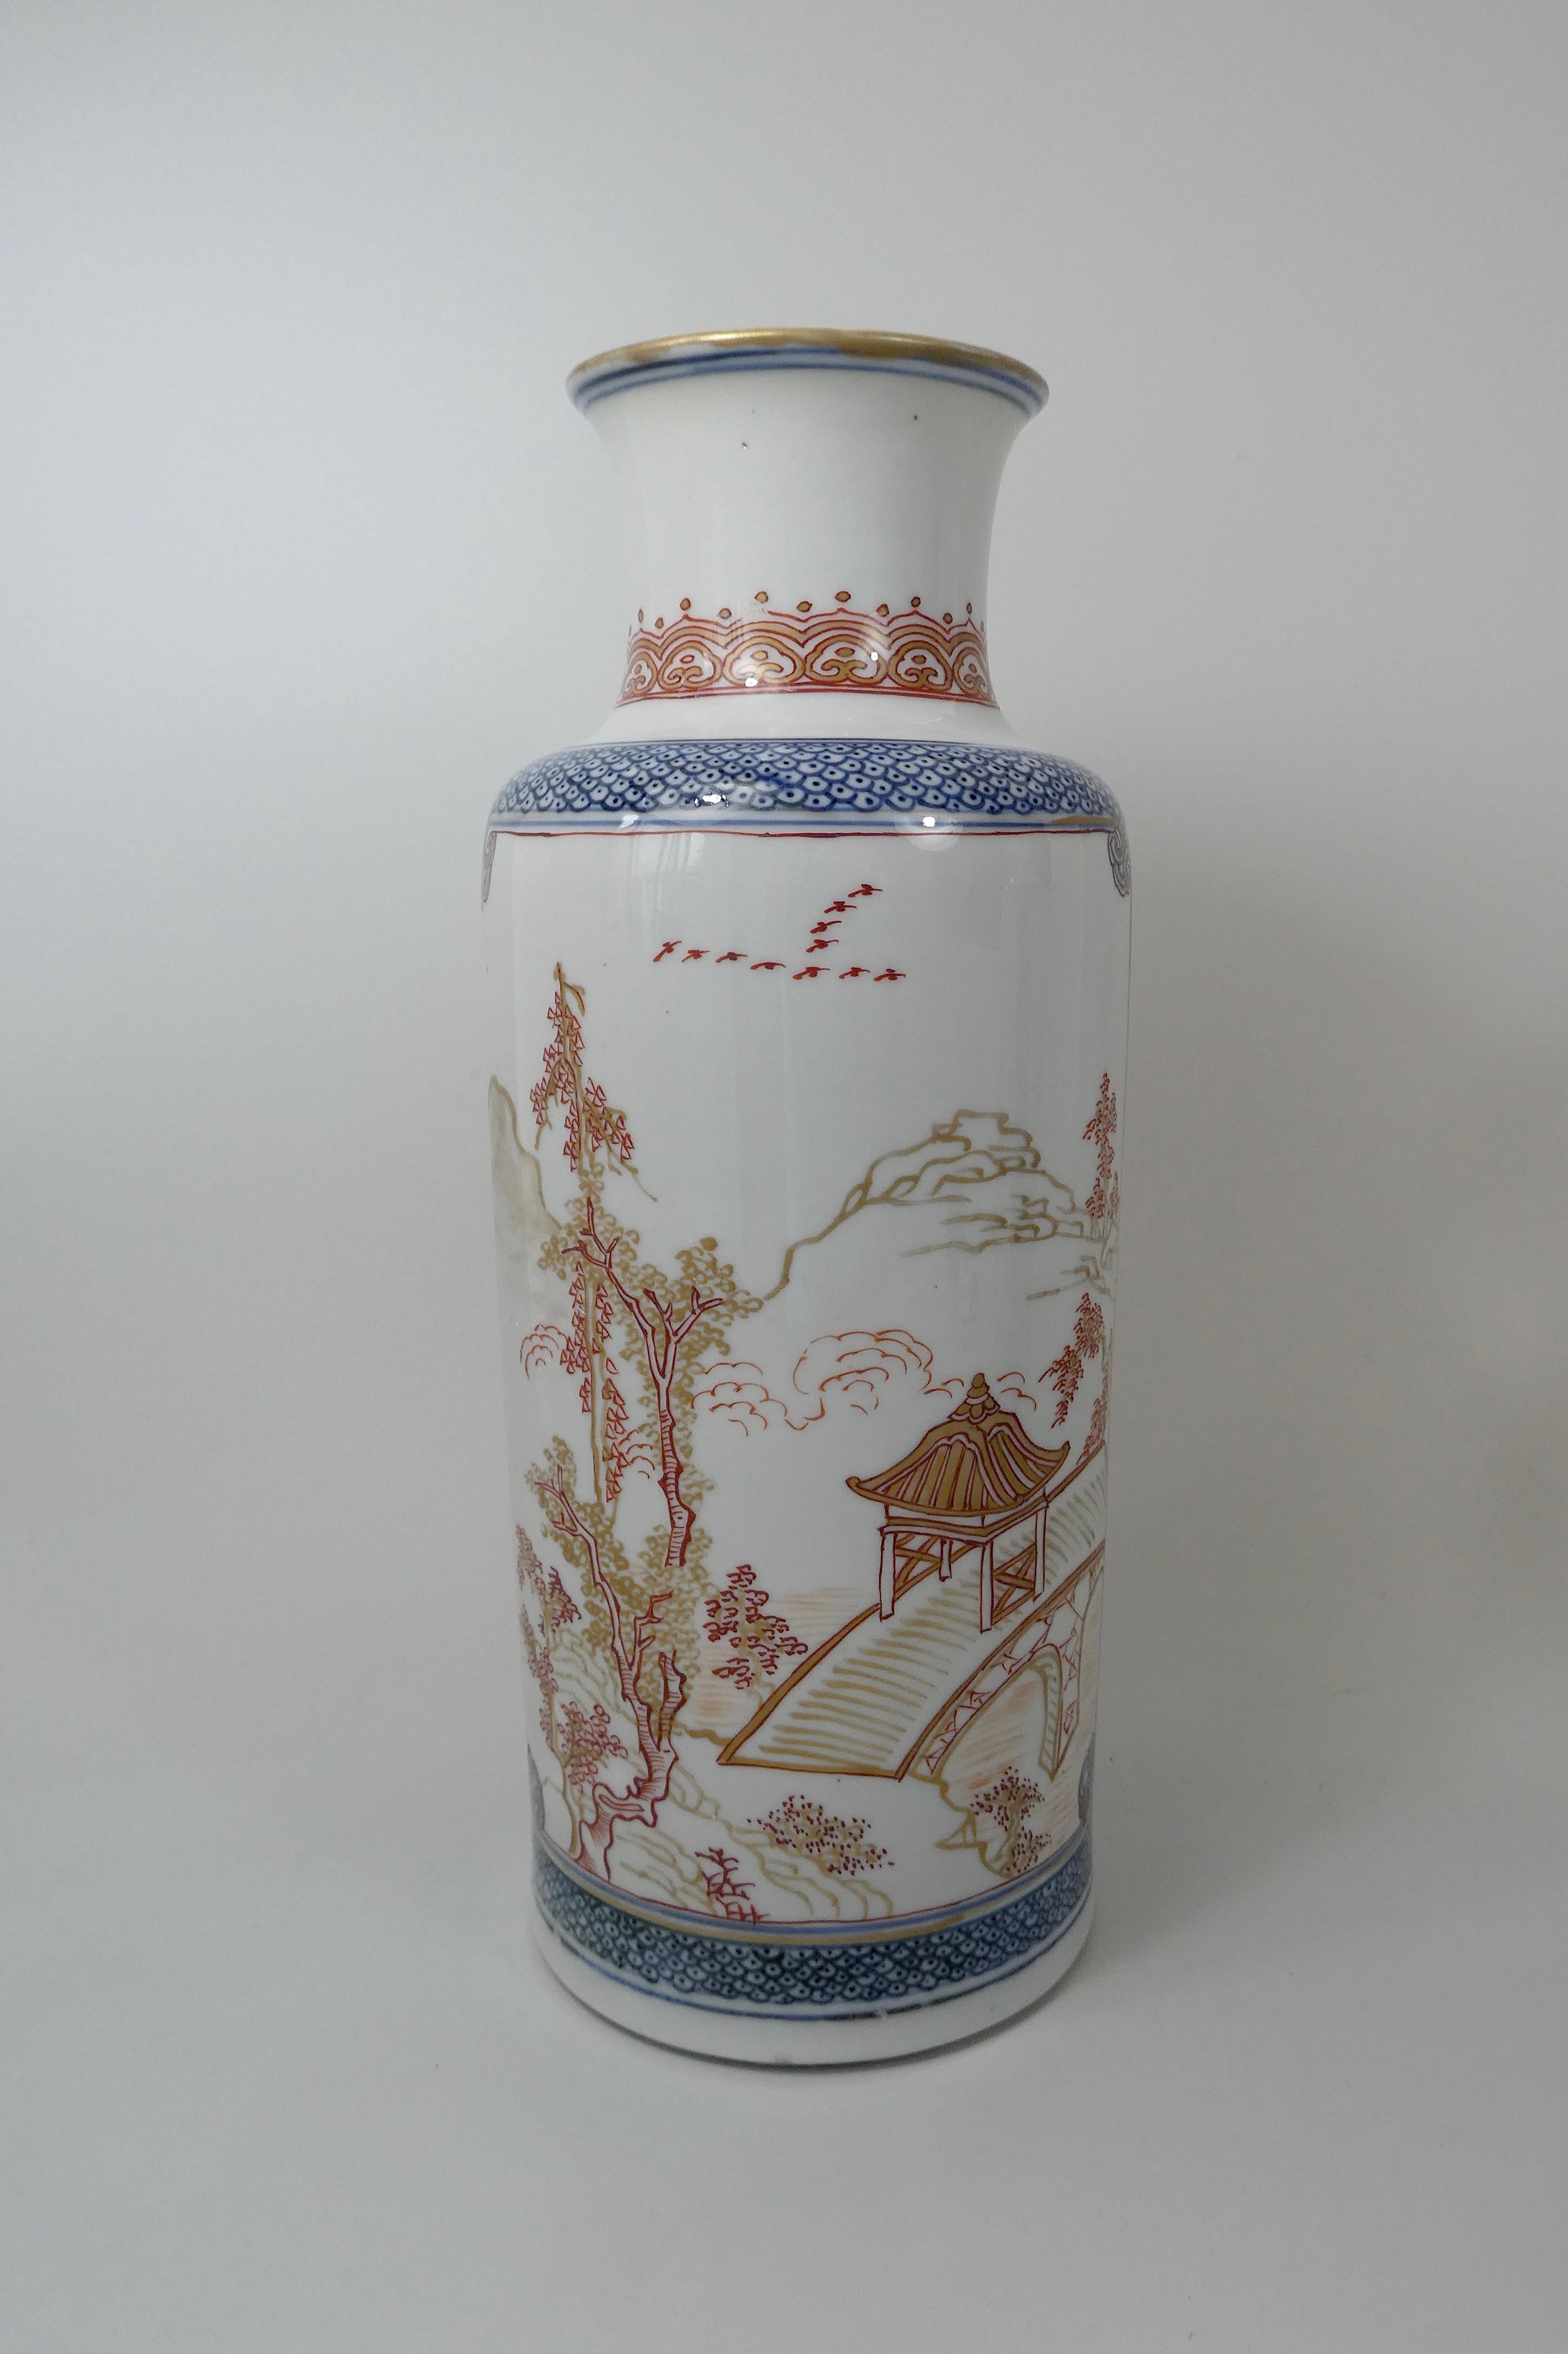 A fine pair of Chinese porcelain vases, c.1700, Kangxi Period. Both vases decorated in ‘rouge de fer’ with pavilions, bridges and trees, amongst mountainous river landscapes. The scenes enclosed within scrolled panels, upon an underglaze blue scale